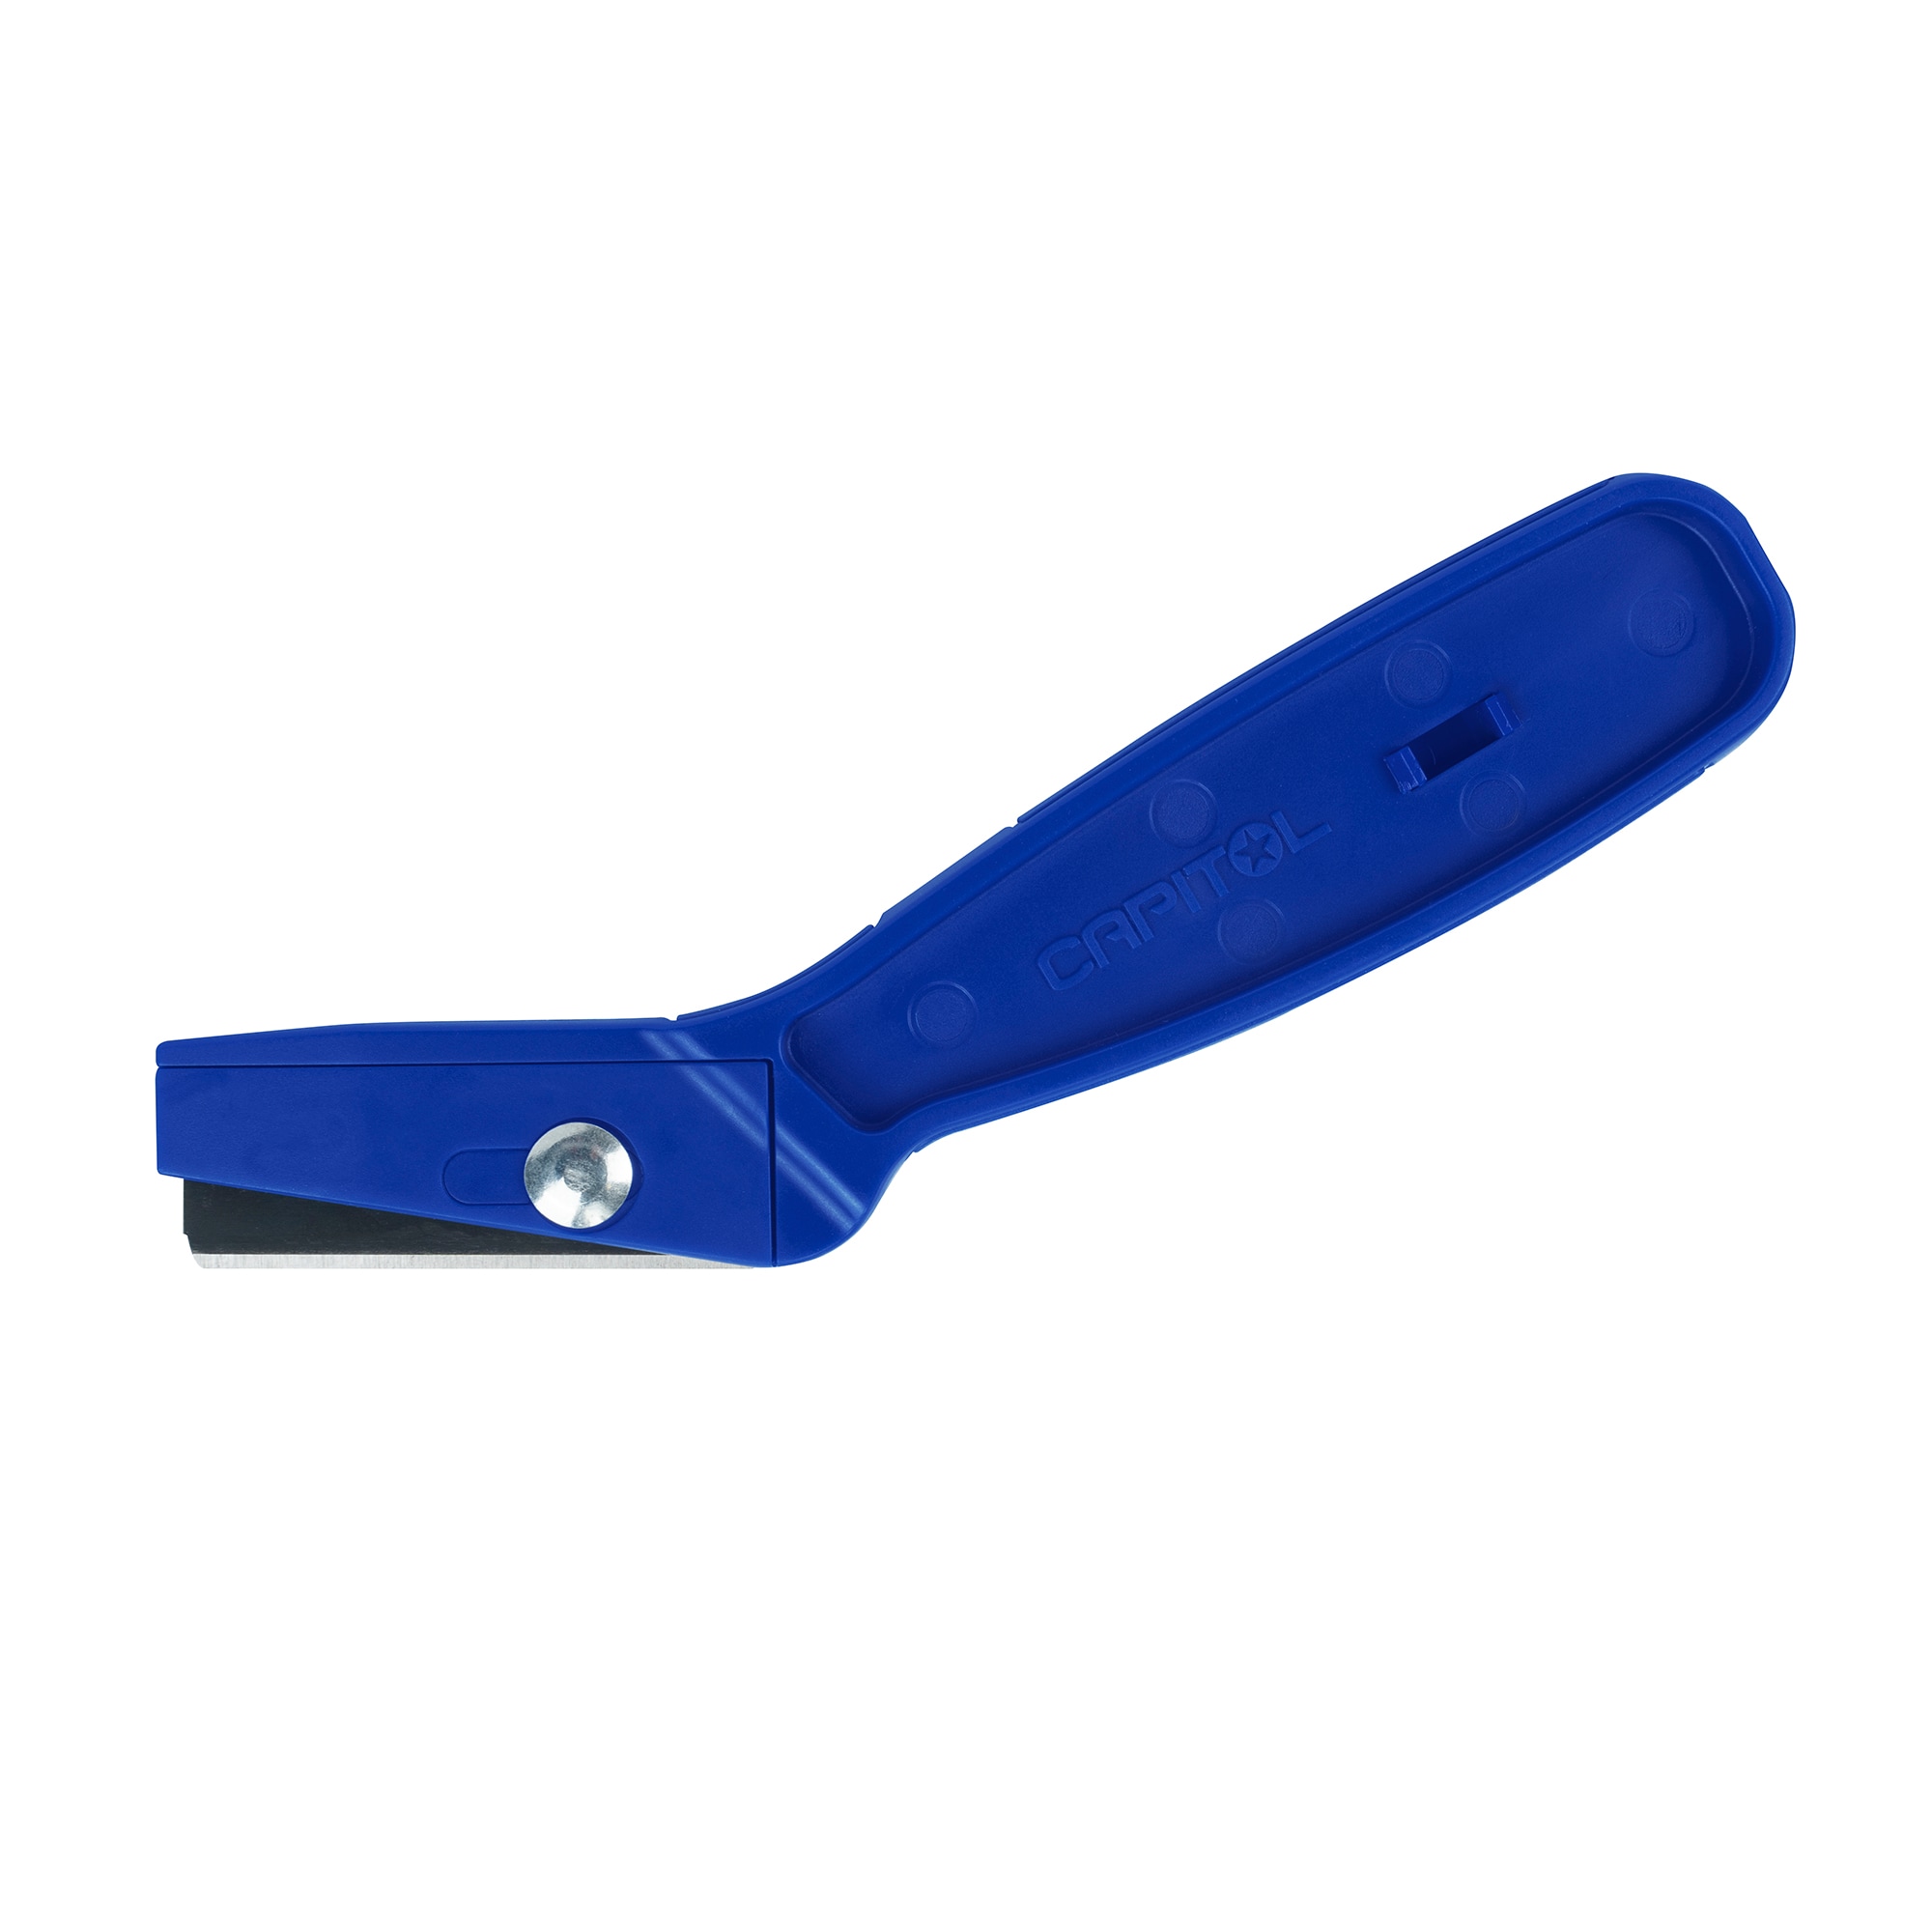 acrylic hook cutter knife with 0.5mm